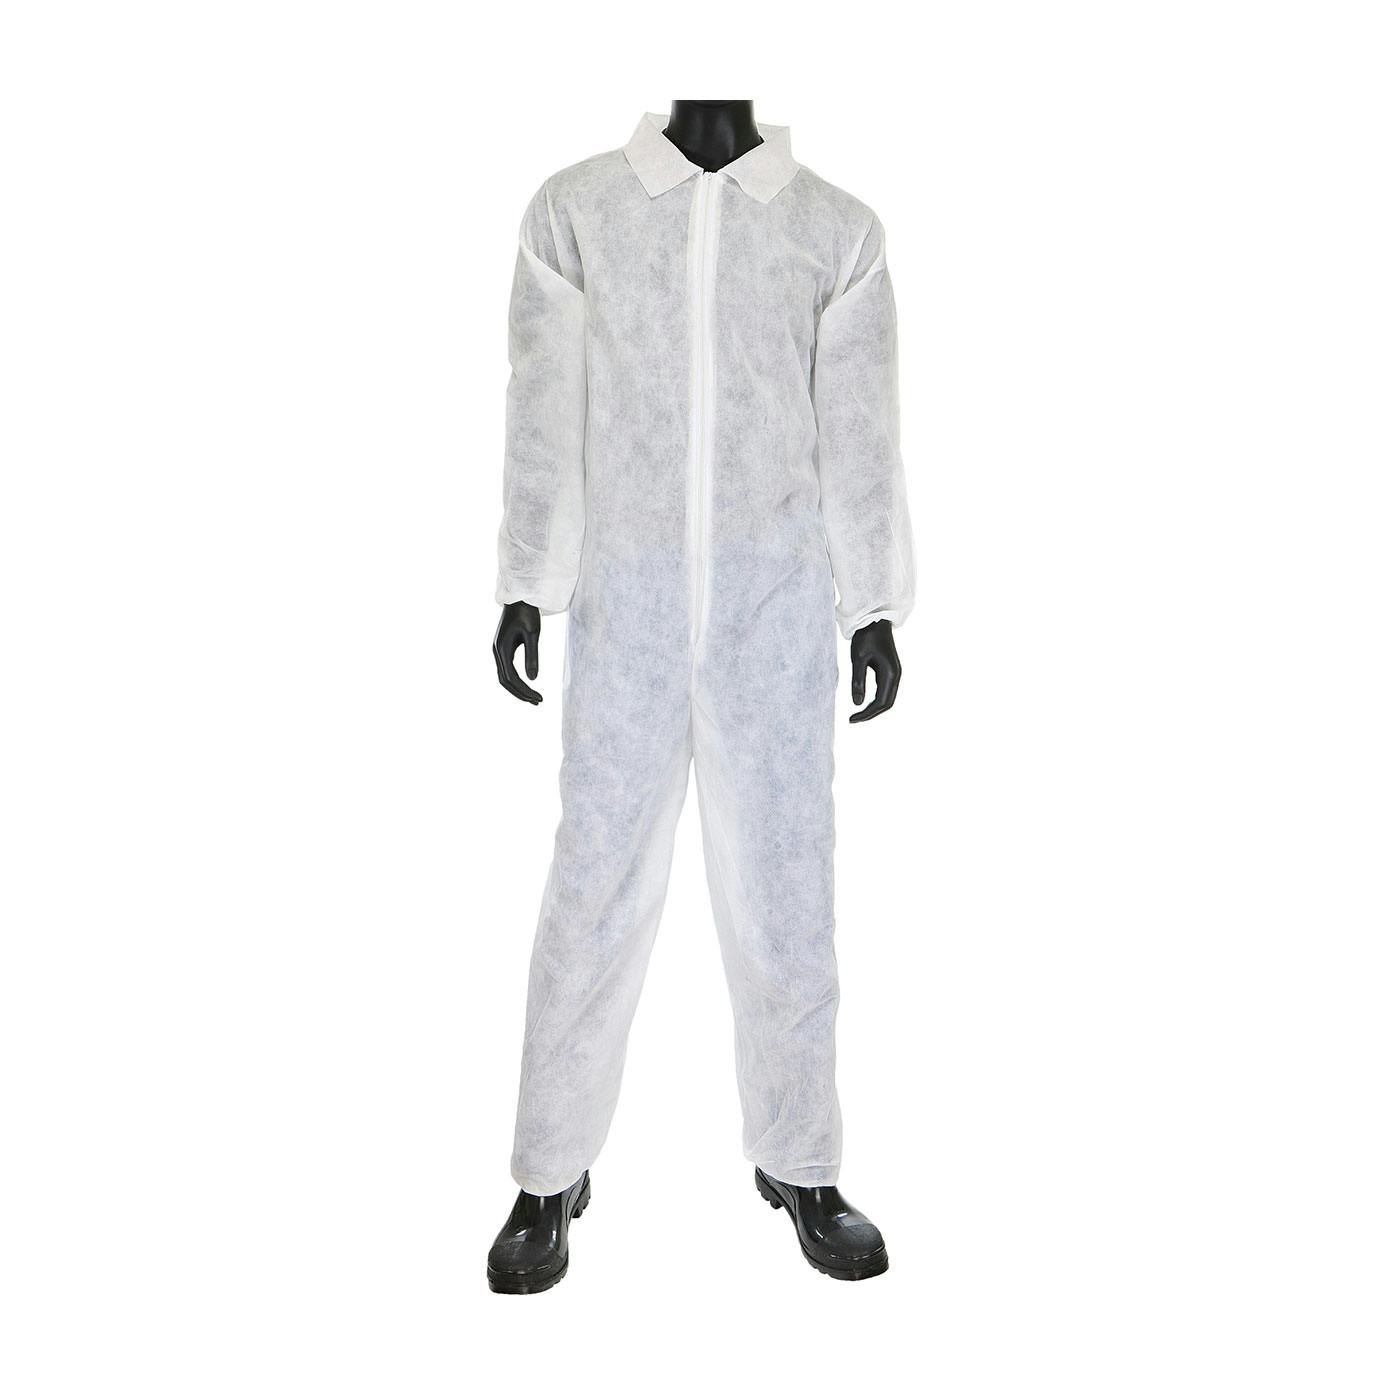 SBP Coverall with Elastic Wrist & Ankle 36 gsm, White (U1200) - 3XL